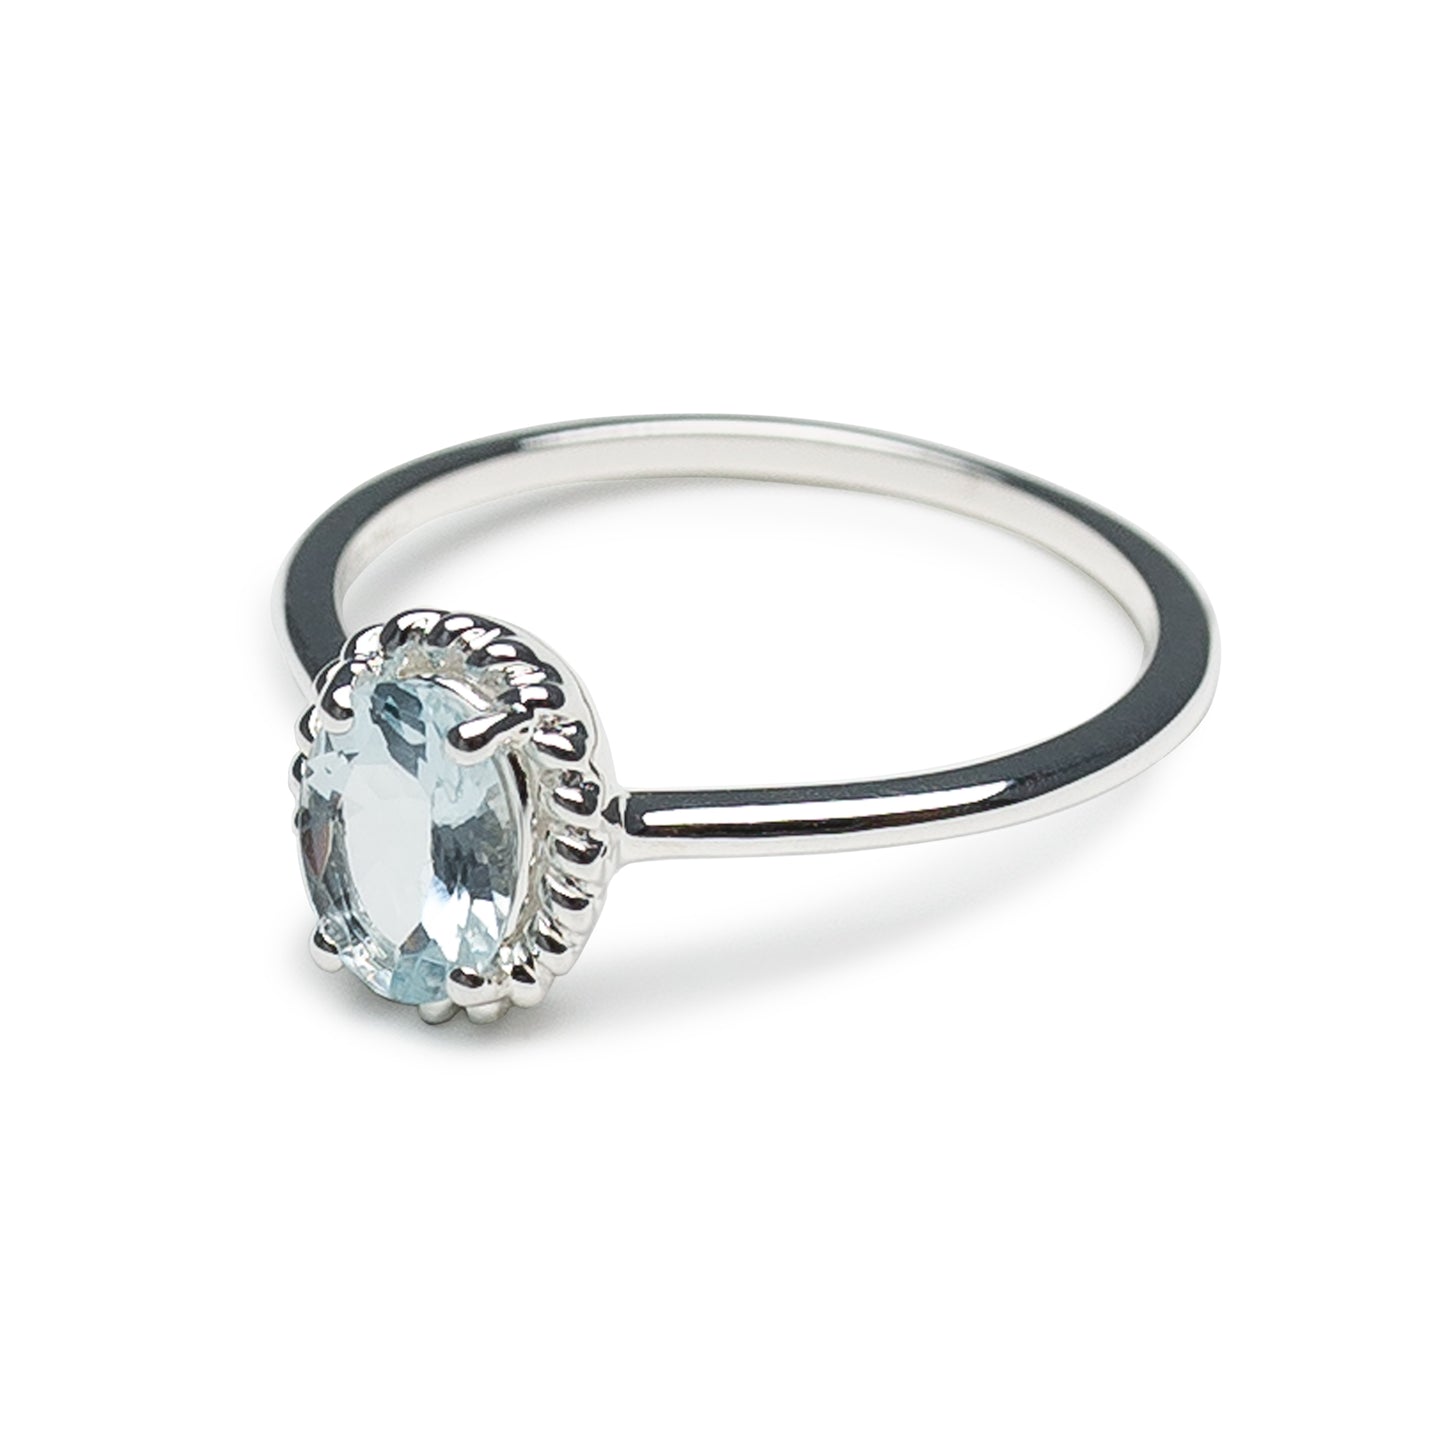 Oval Aquamarine Ring in Sterling Silver